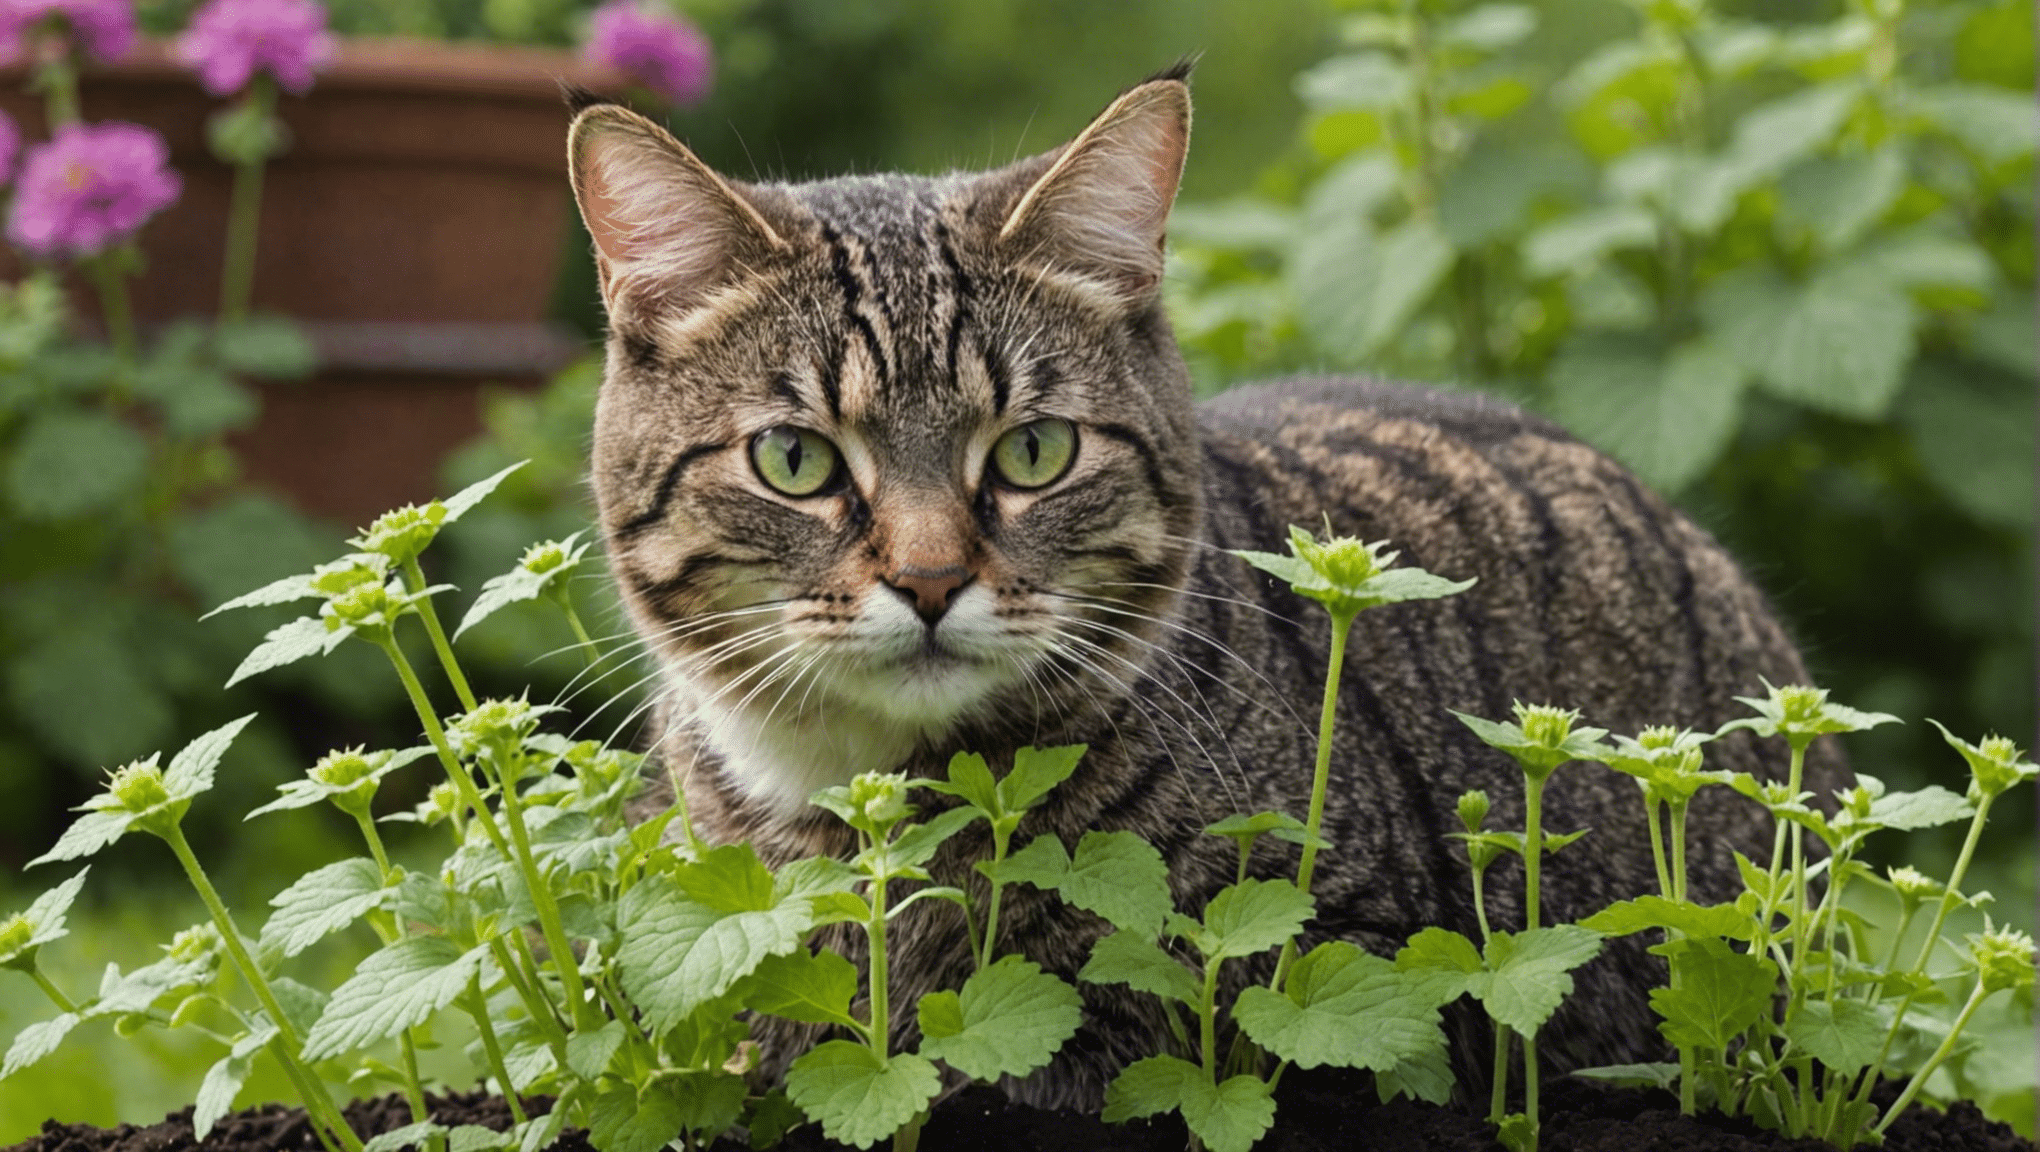 learn how to plant catnip seeds with our step-by-step guide. find out the best time to sow, the right soil conditions, and essential care tips for growing healthy catnip plants.